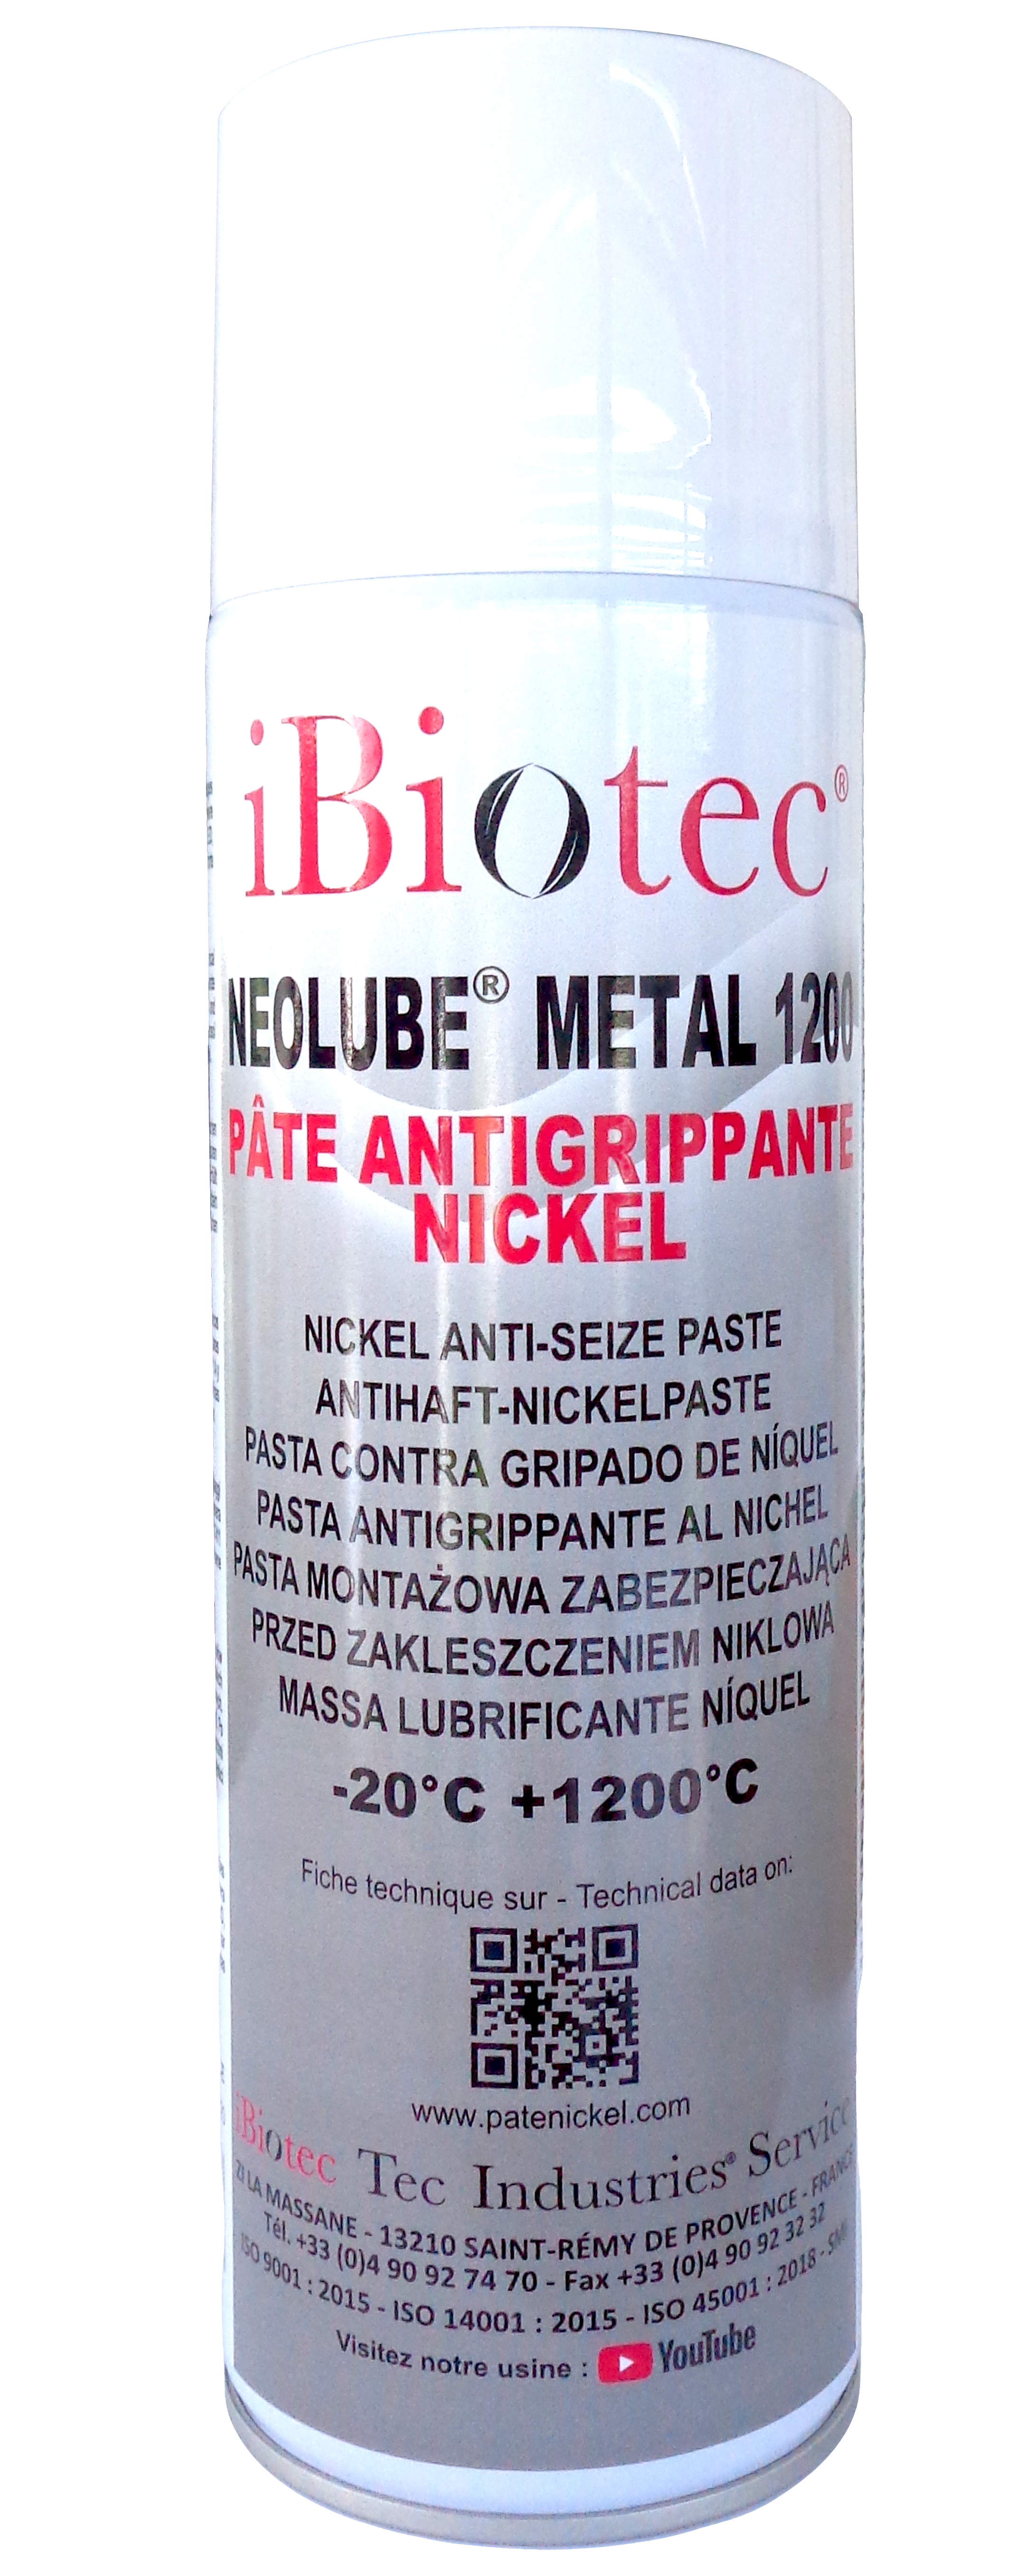 nickel grease for very high temperatures 1200°C. anti-corrosion. weld-resistant. very low tightening torque following exposure to temperature. anti-seize nickel paste aerosol, nickel paste, nickel grease, high-temperature nickel grease, nickel assembly paste. high-temperature grease. very high-temperature grease. technical grease suppliers. industrial grease supplier. industrial lubricant manufacturers. technical grease manufacturers. industrial grease manufacturers. industrial lubricant manufacturers.